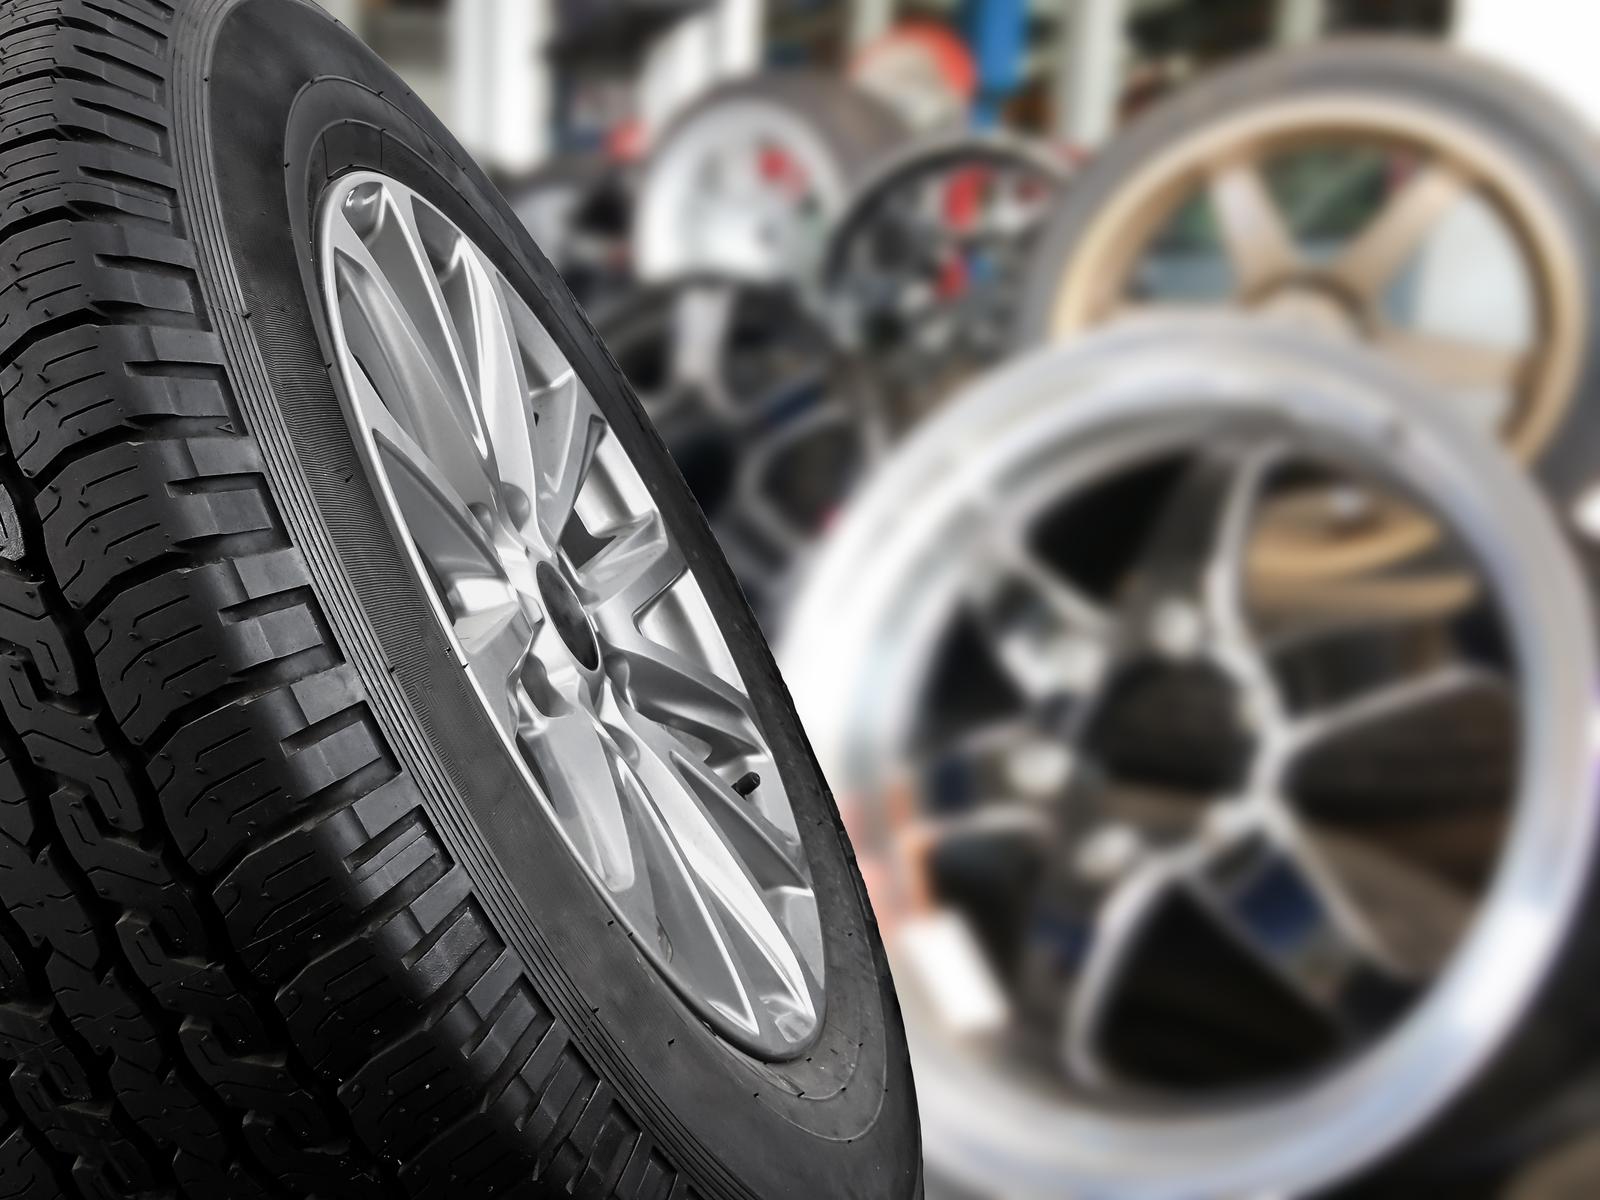 VALLAI OÜ - cars and car supplies, Tyres and Tireworks